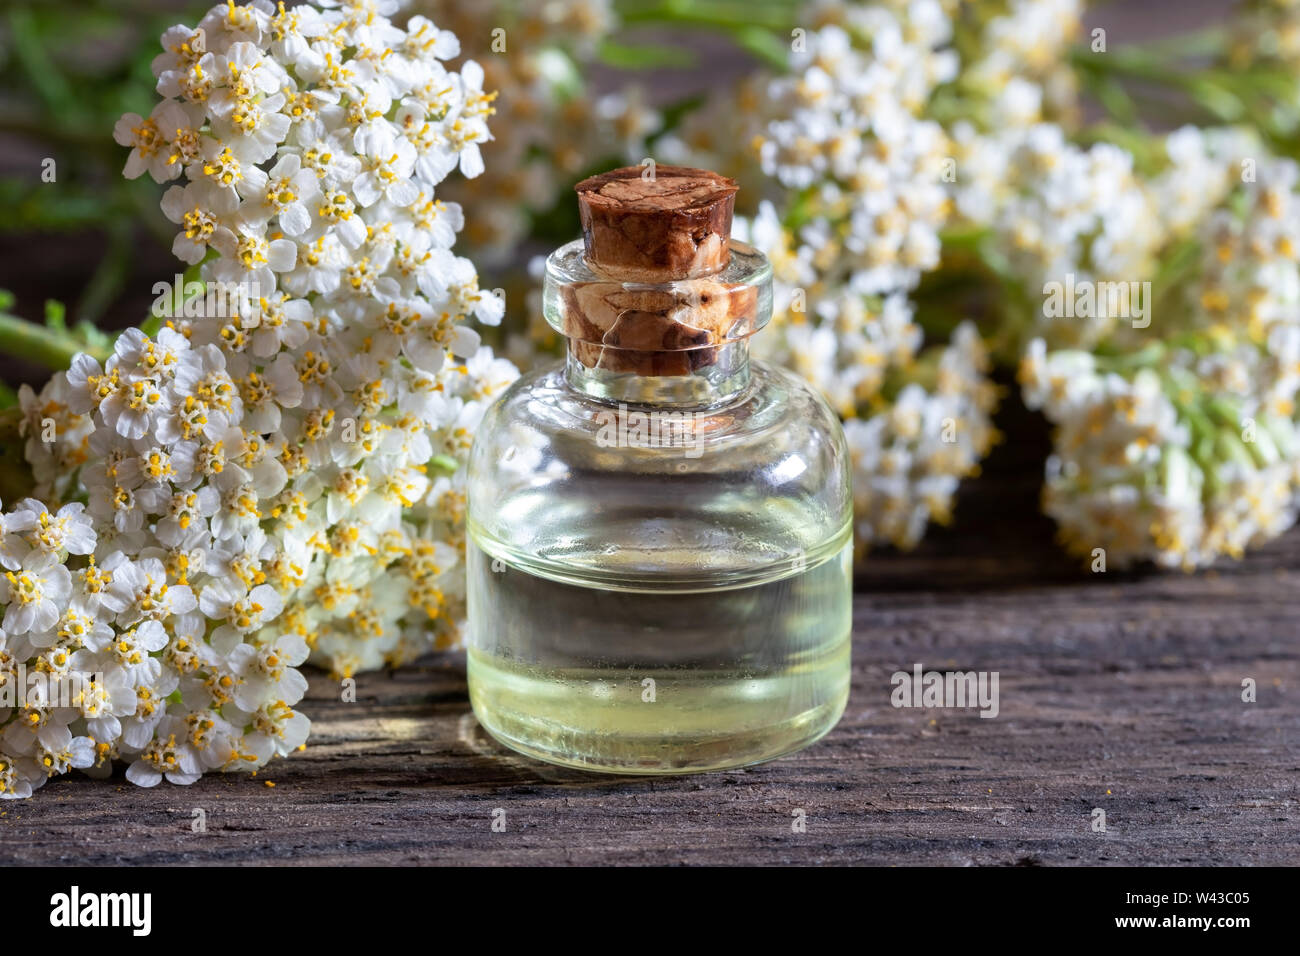 A bottle of essential oil with fresh blooming yarrow plant Stock Photo